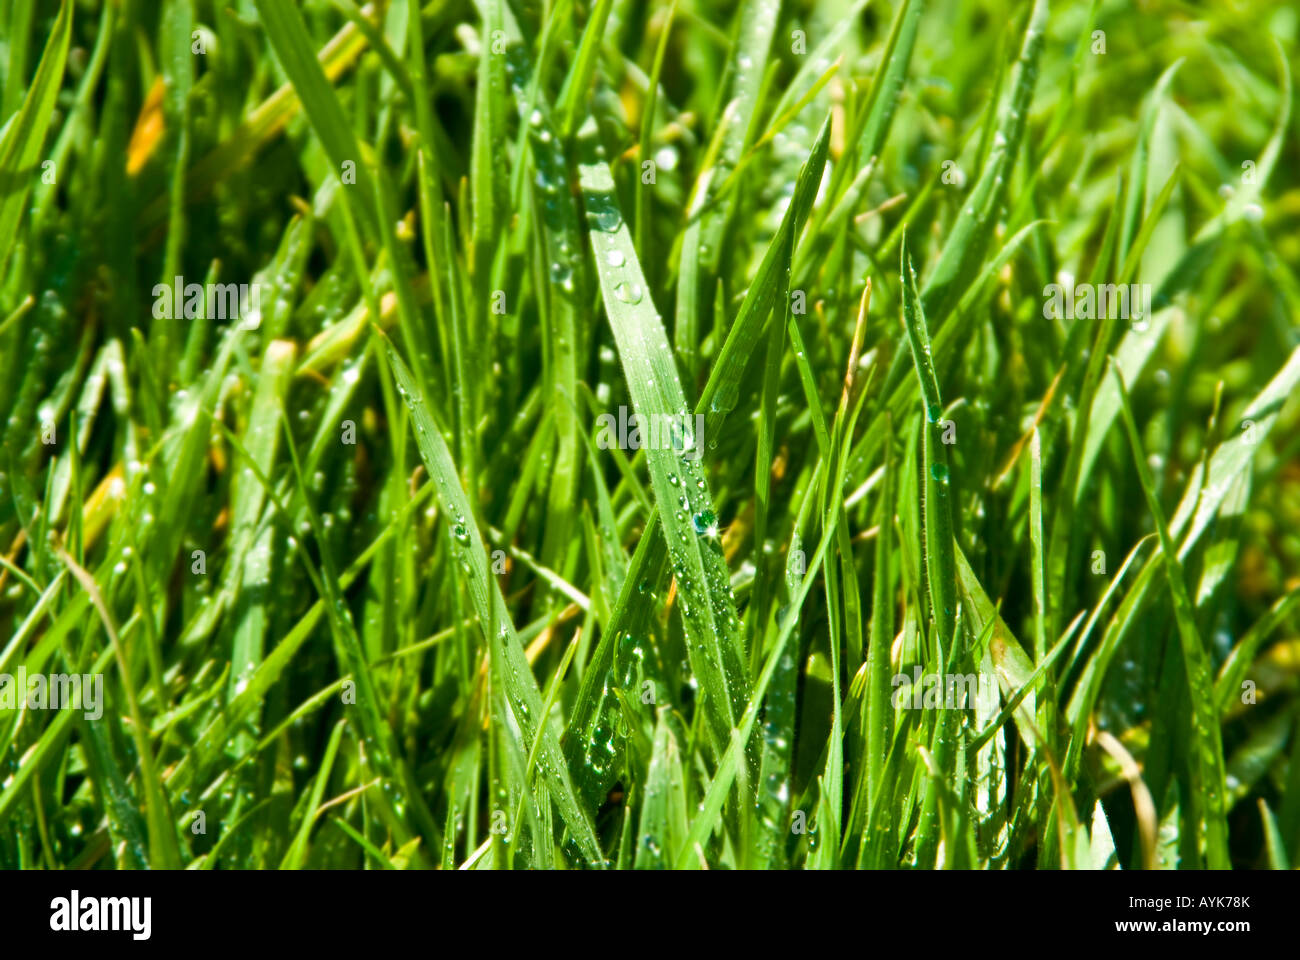 Horizontal close up of early morning dew drops on blades of grass in the garden Stock Photo